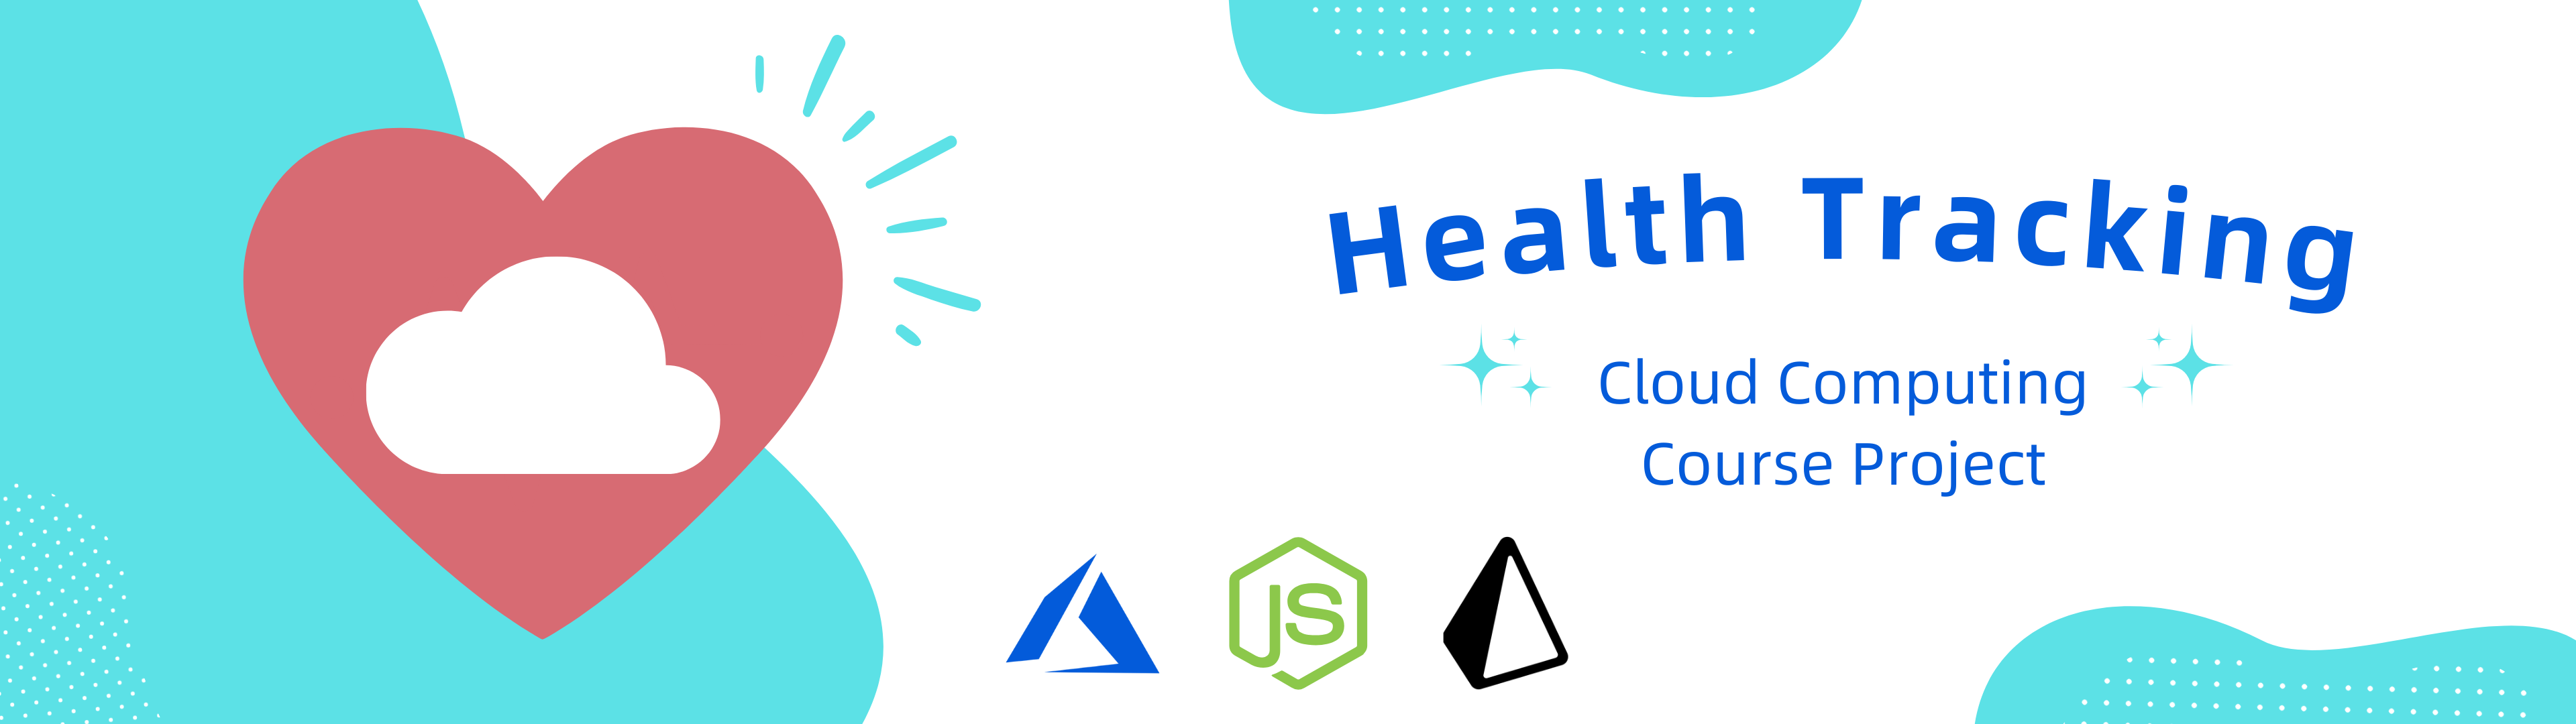 Health Tracking - Cloud Computing Course Project Banner.png